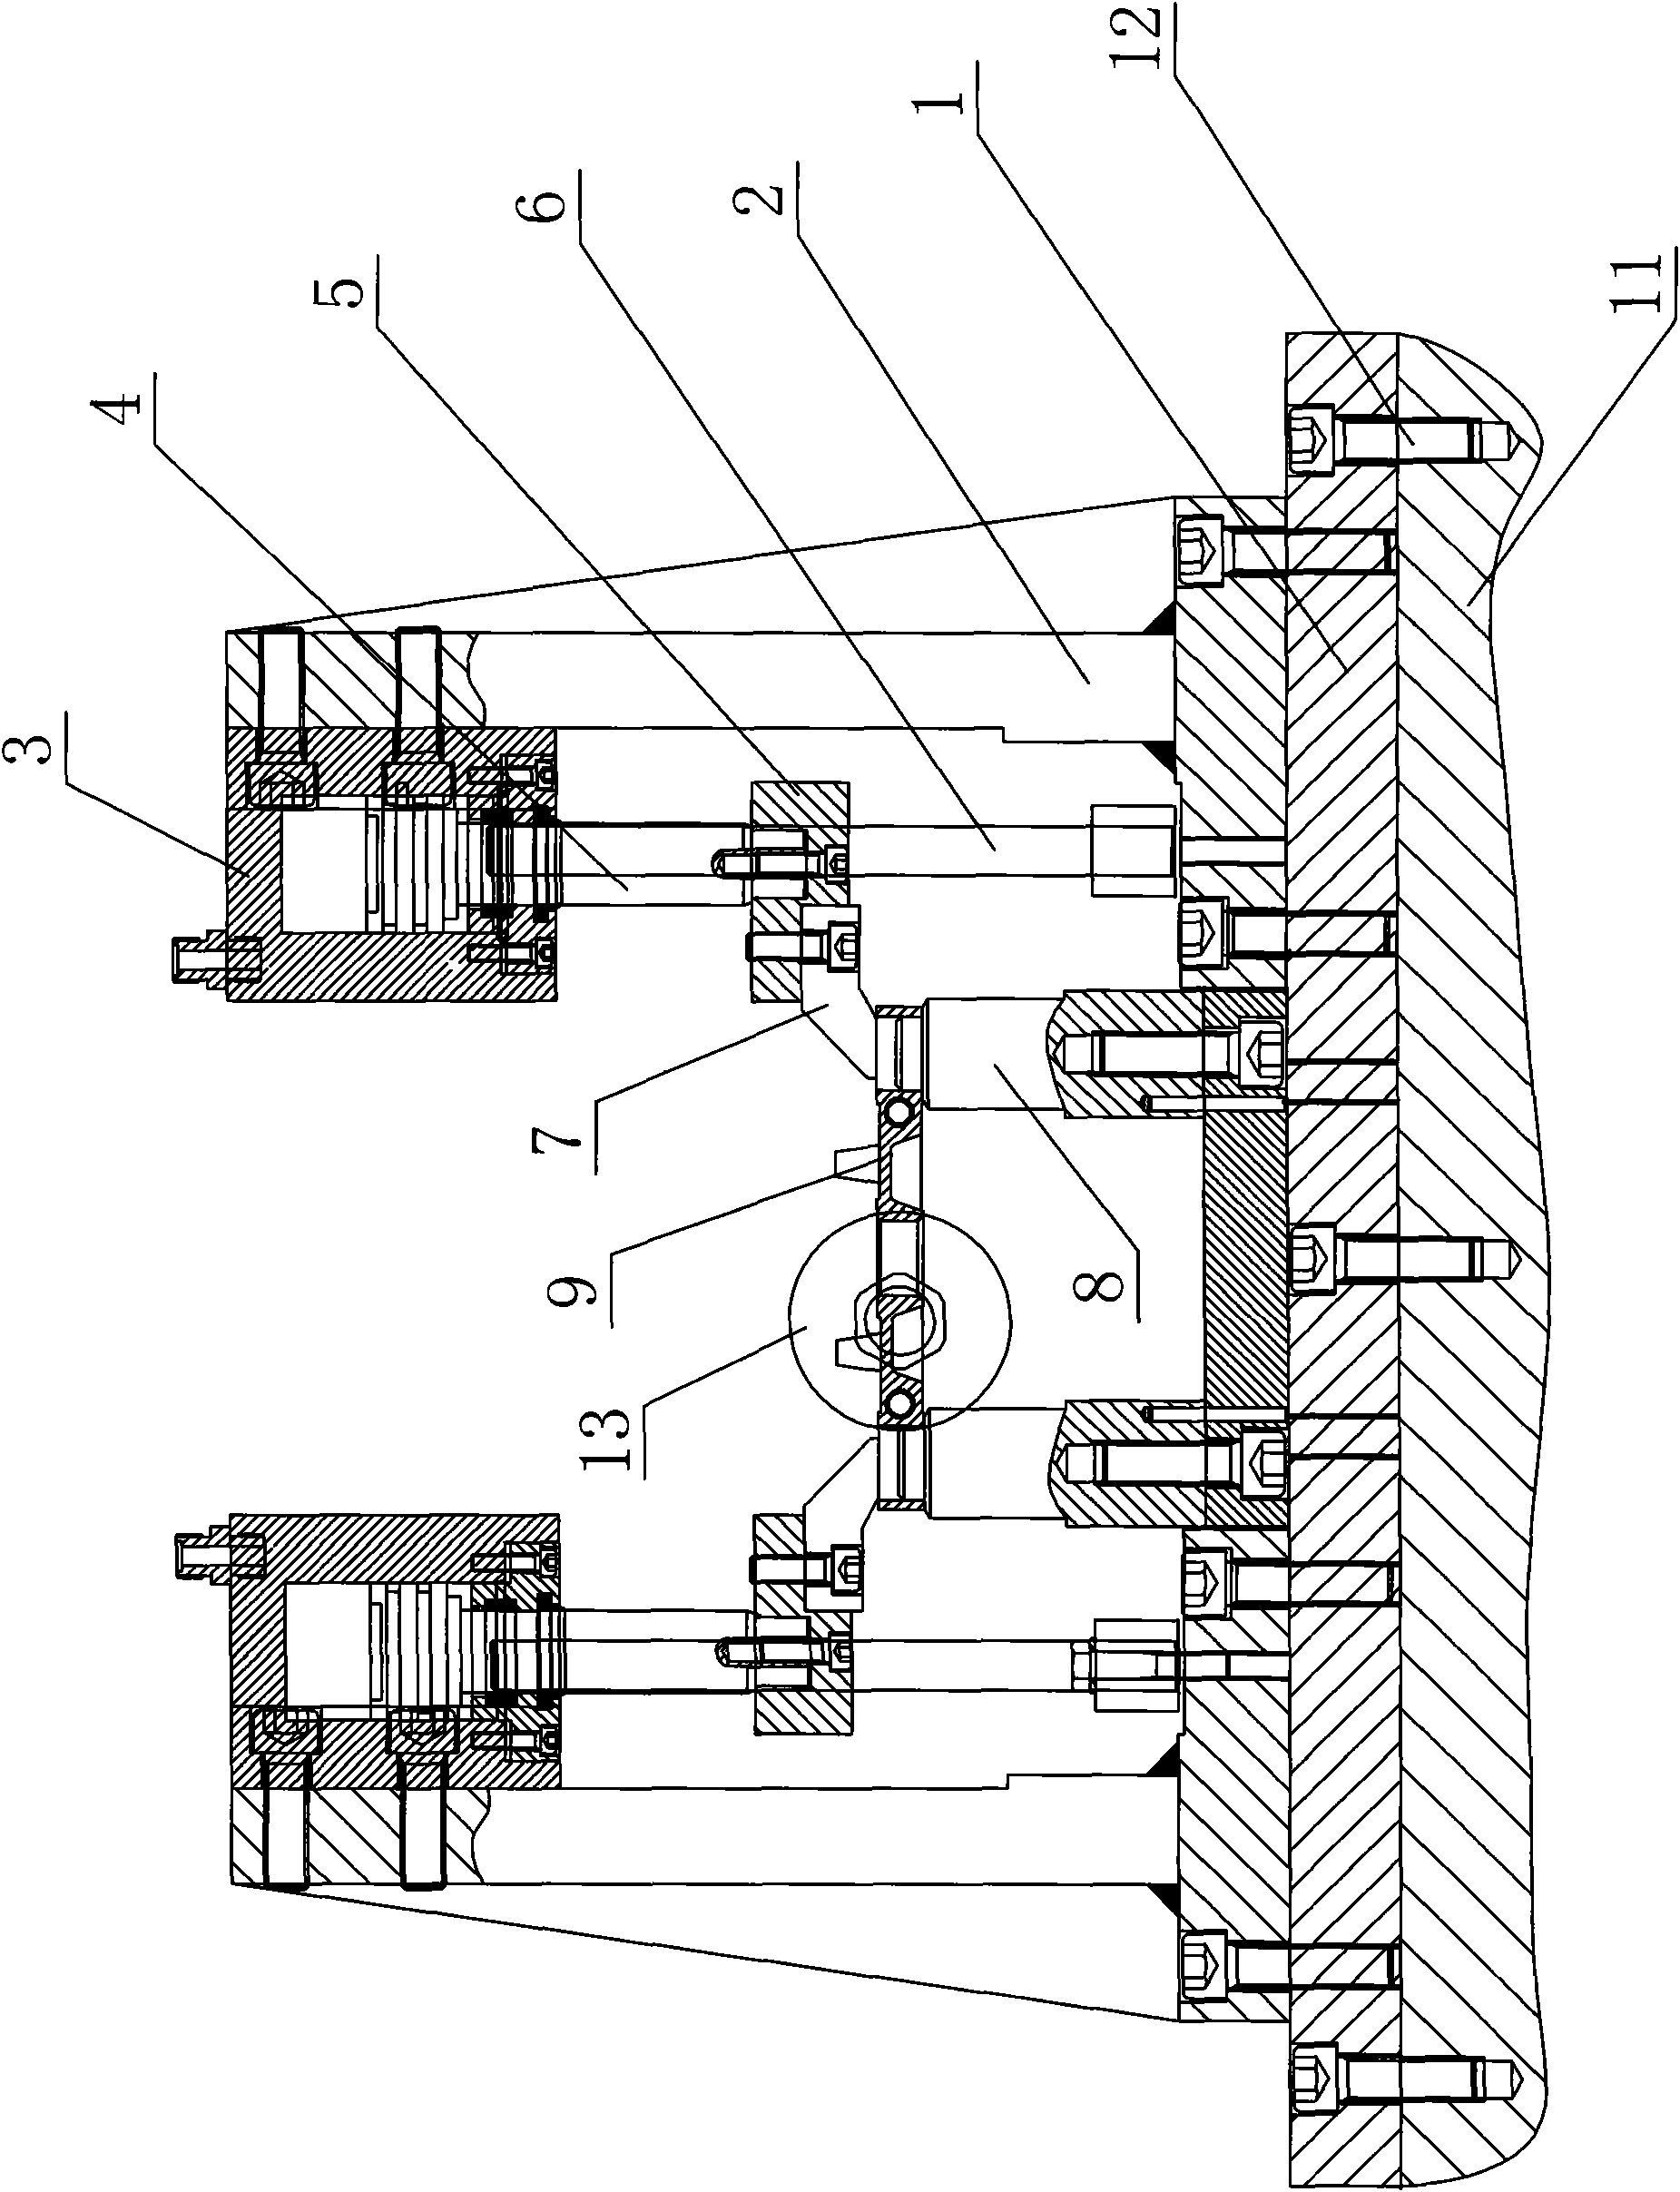 Special clamp for zero-angle opening of lower connecting plate of horizontal milling miller